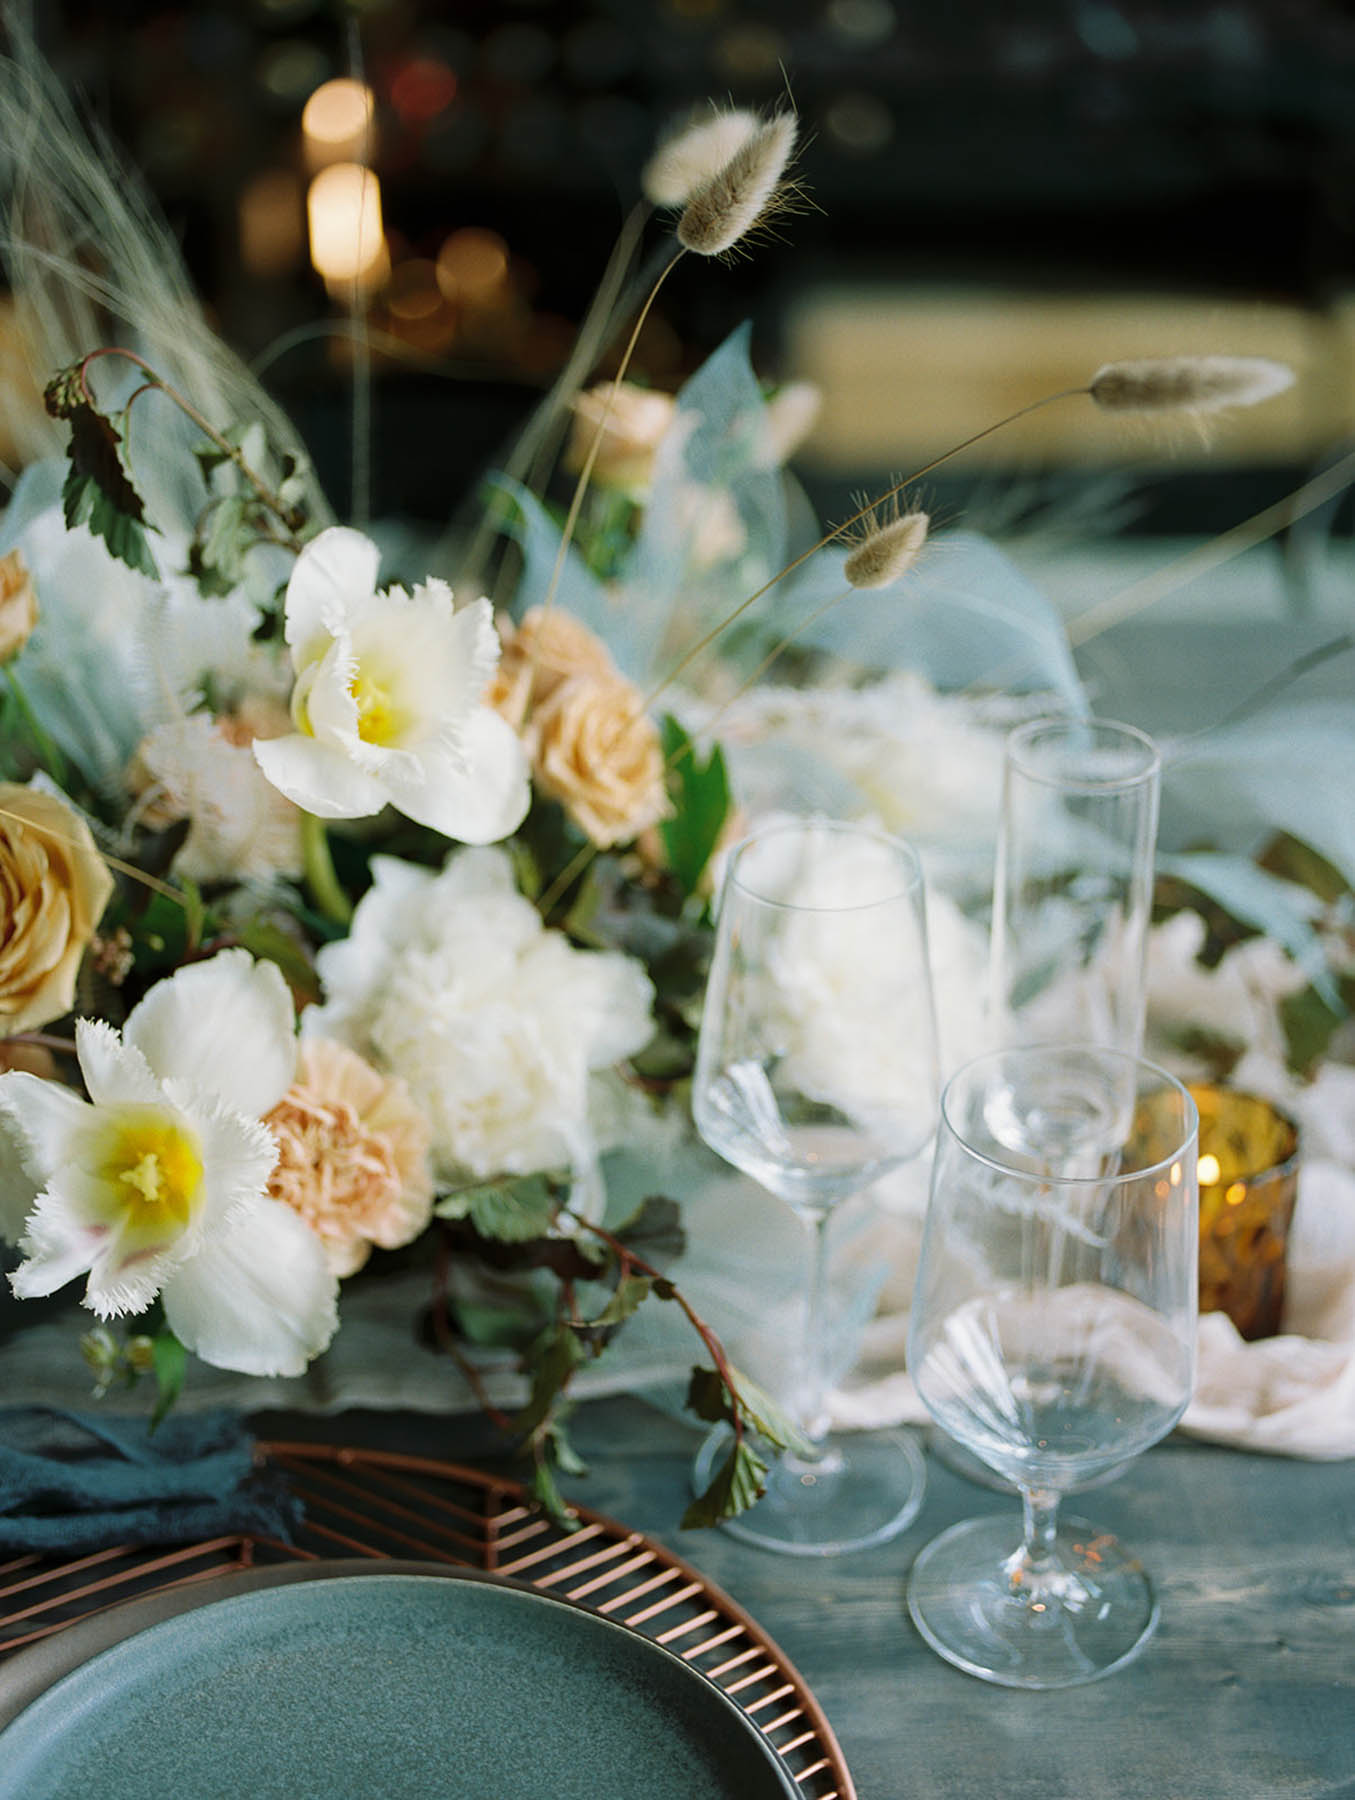 A close-up on a tablescape of white and pink flroals and blue cloth. There is a gold candle and clear glasses.